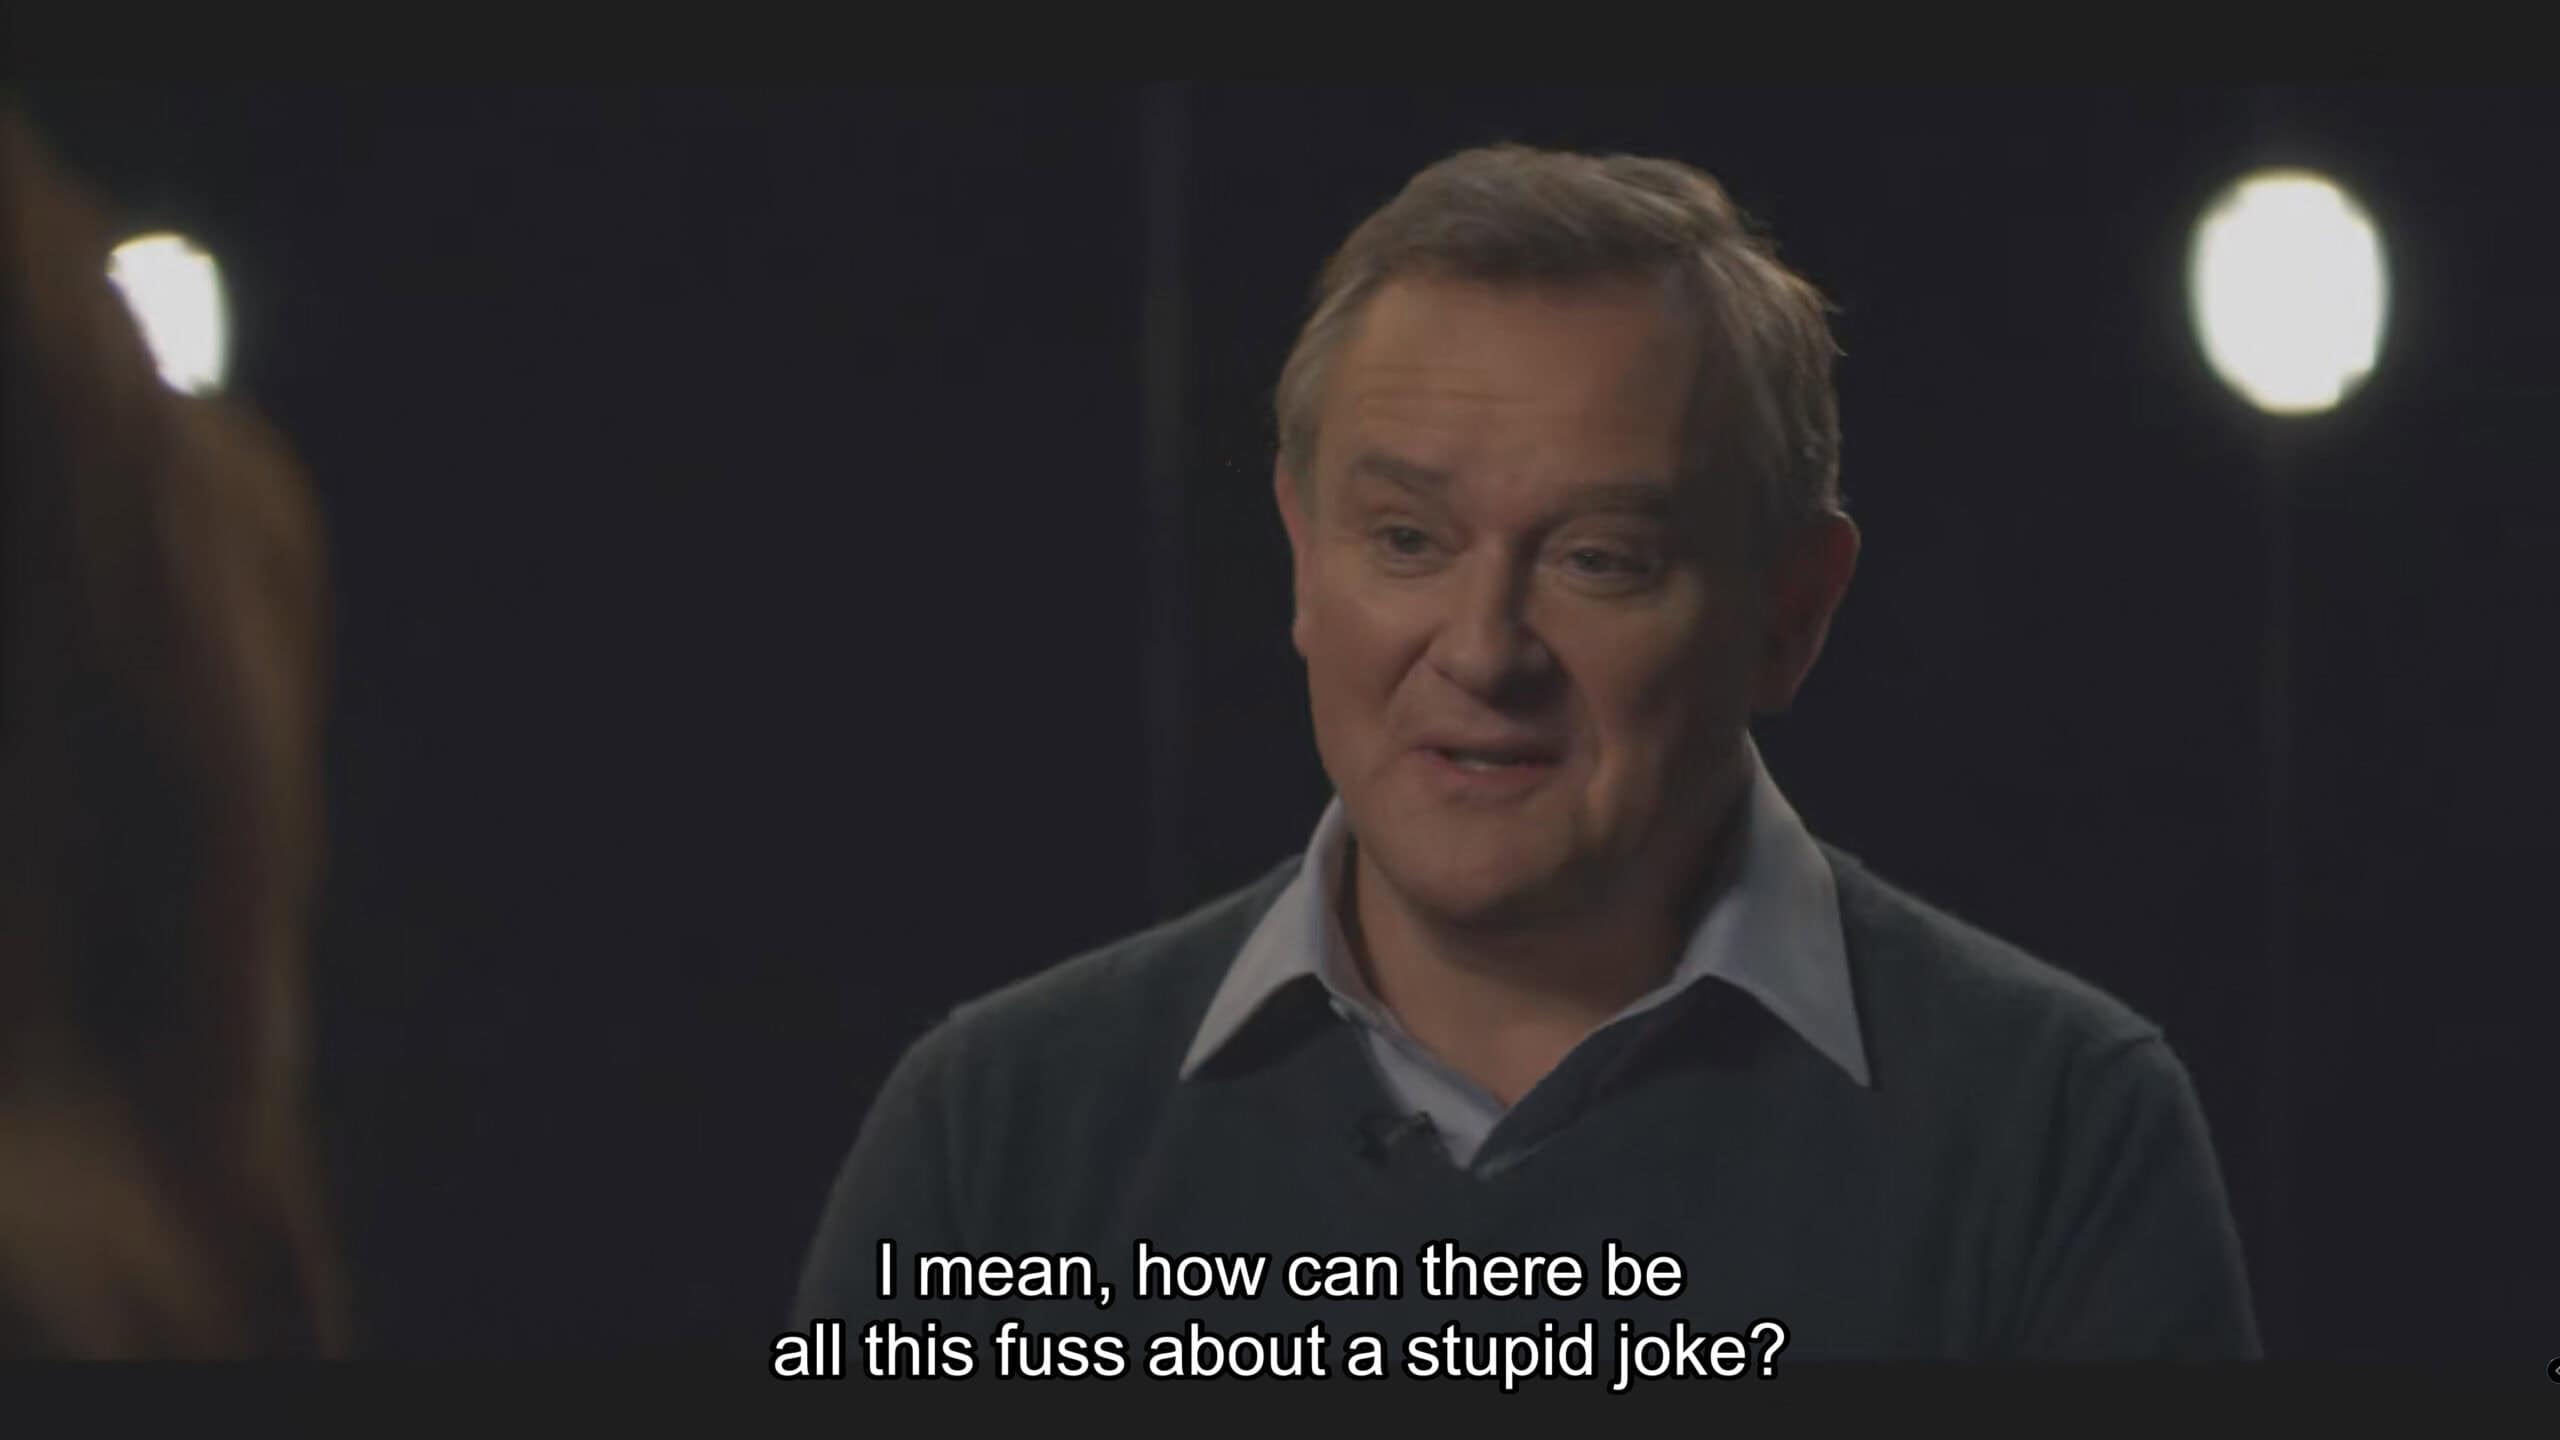 Hugh Bonneville as Douglas downplaying the situation he is in